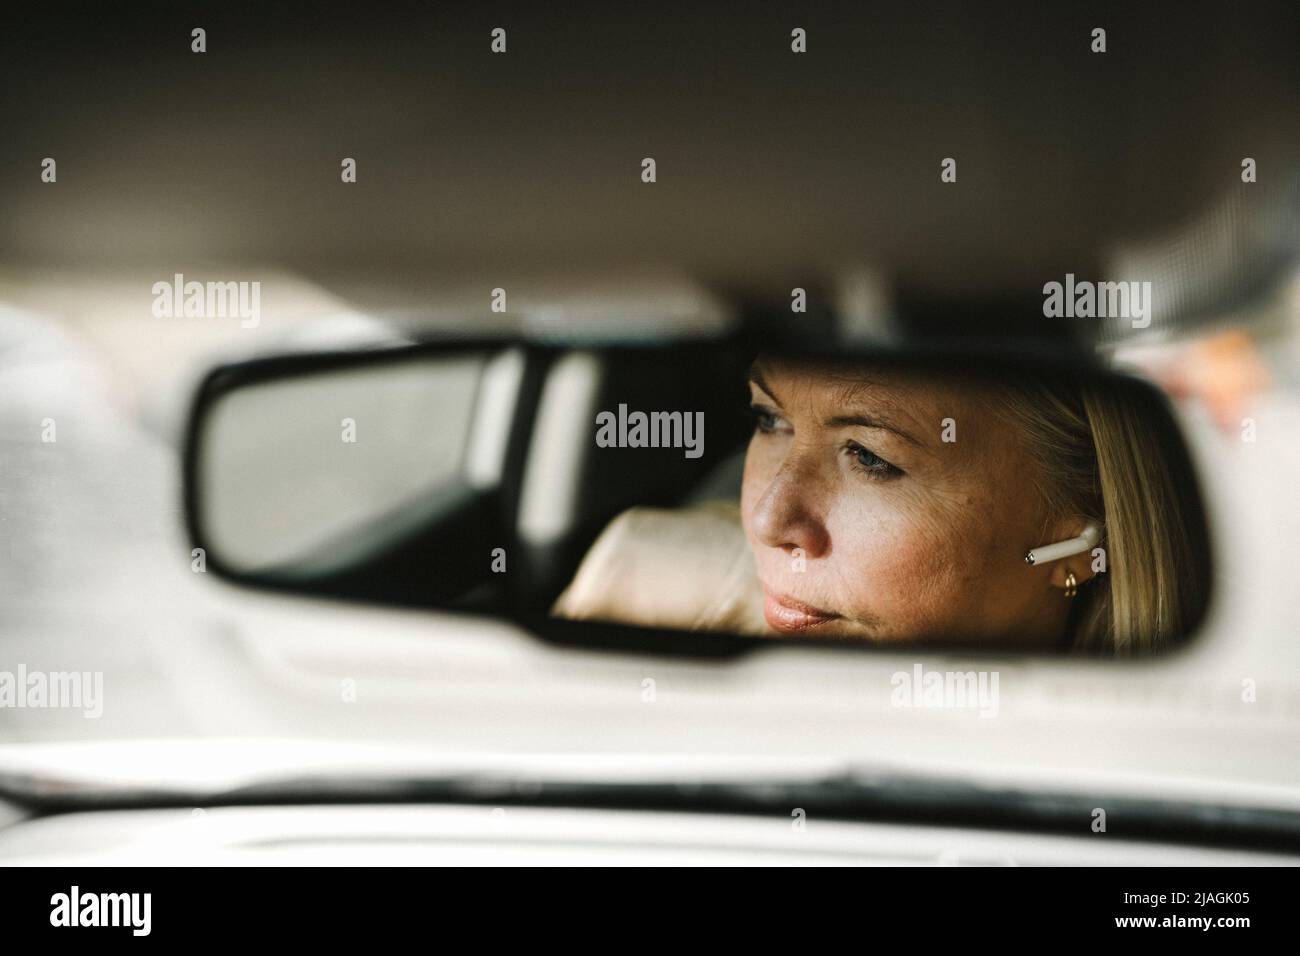 Businesswoman with in-ear headphones seen in rear-view mirror reflection of car Stock Photo